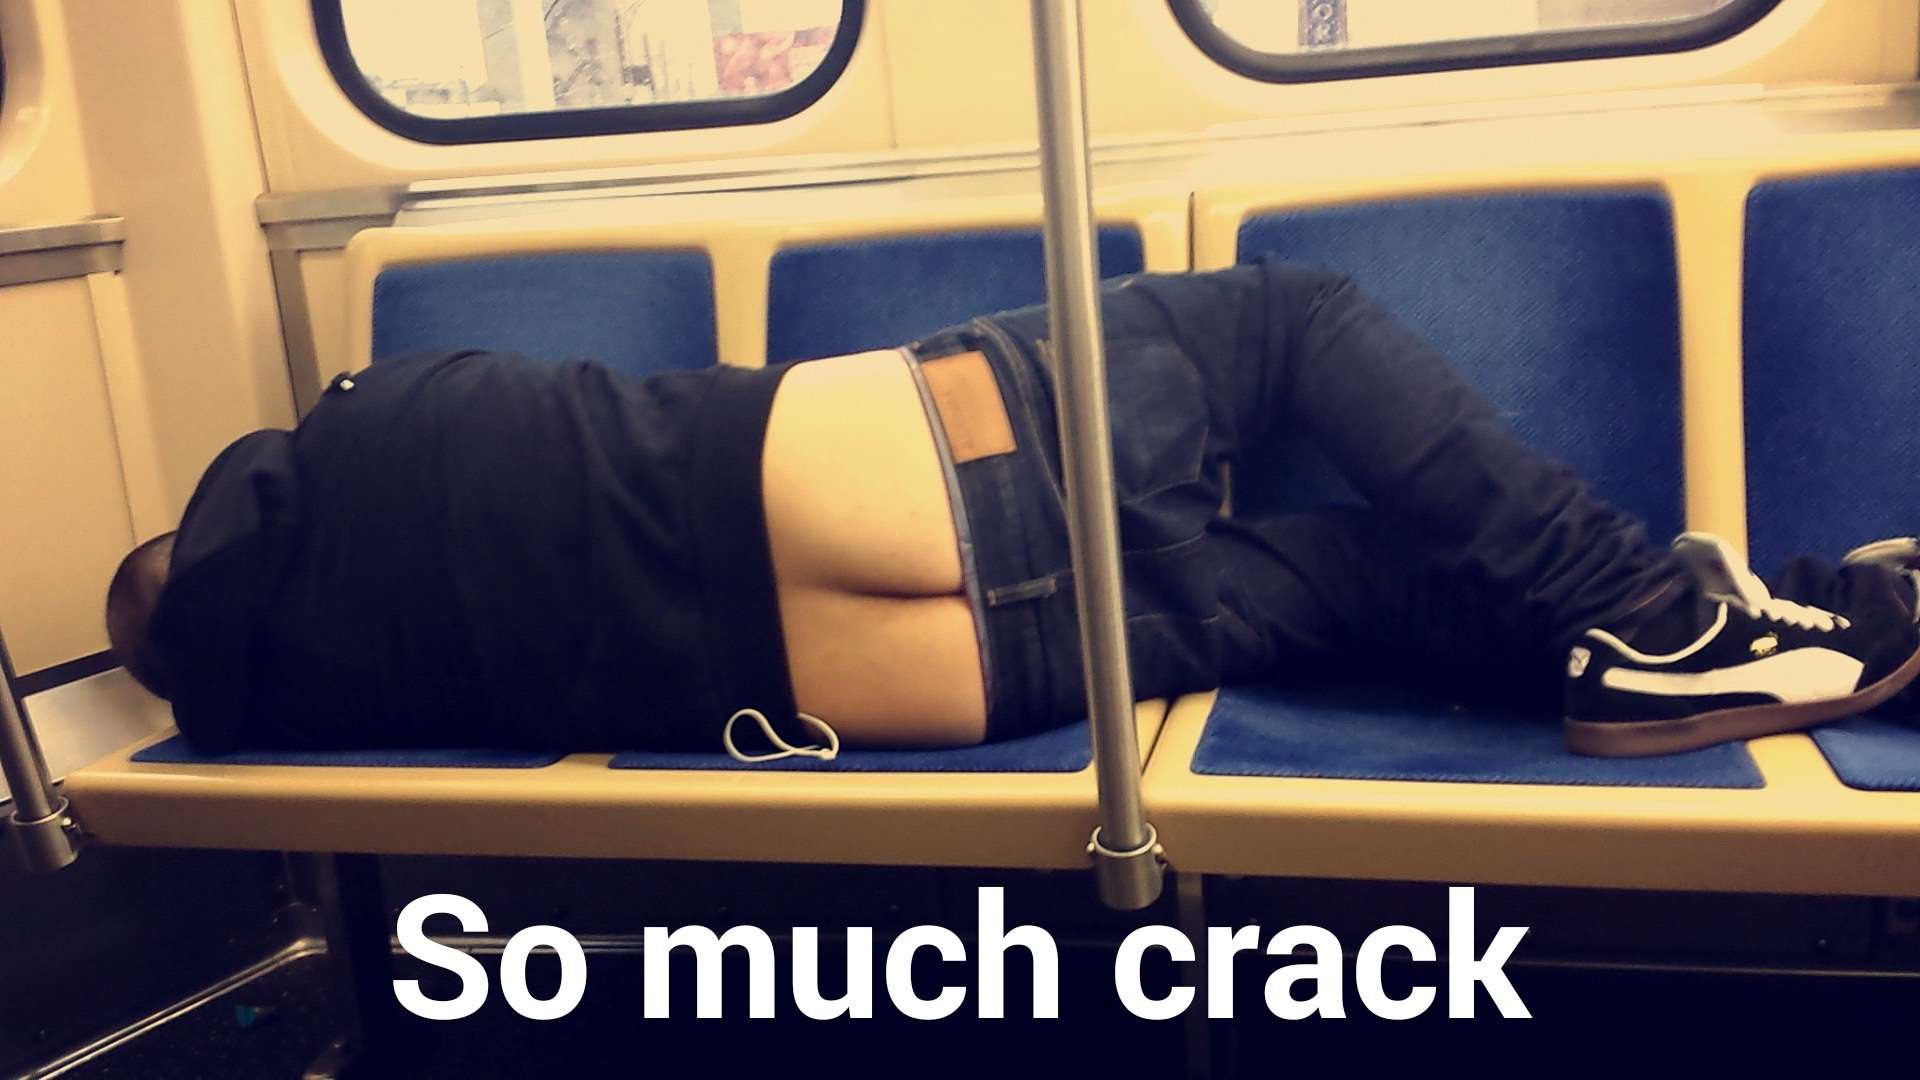 That’s a lot of Crack